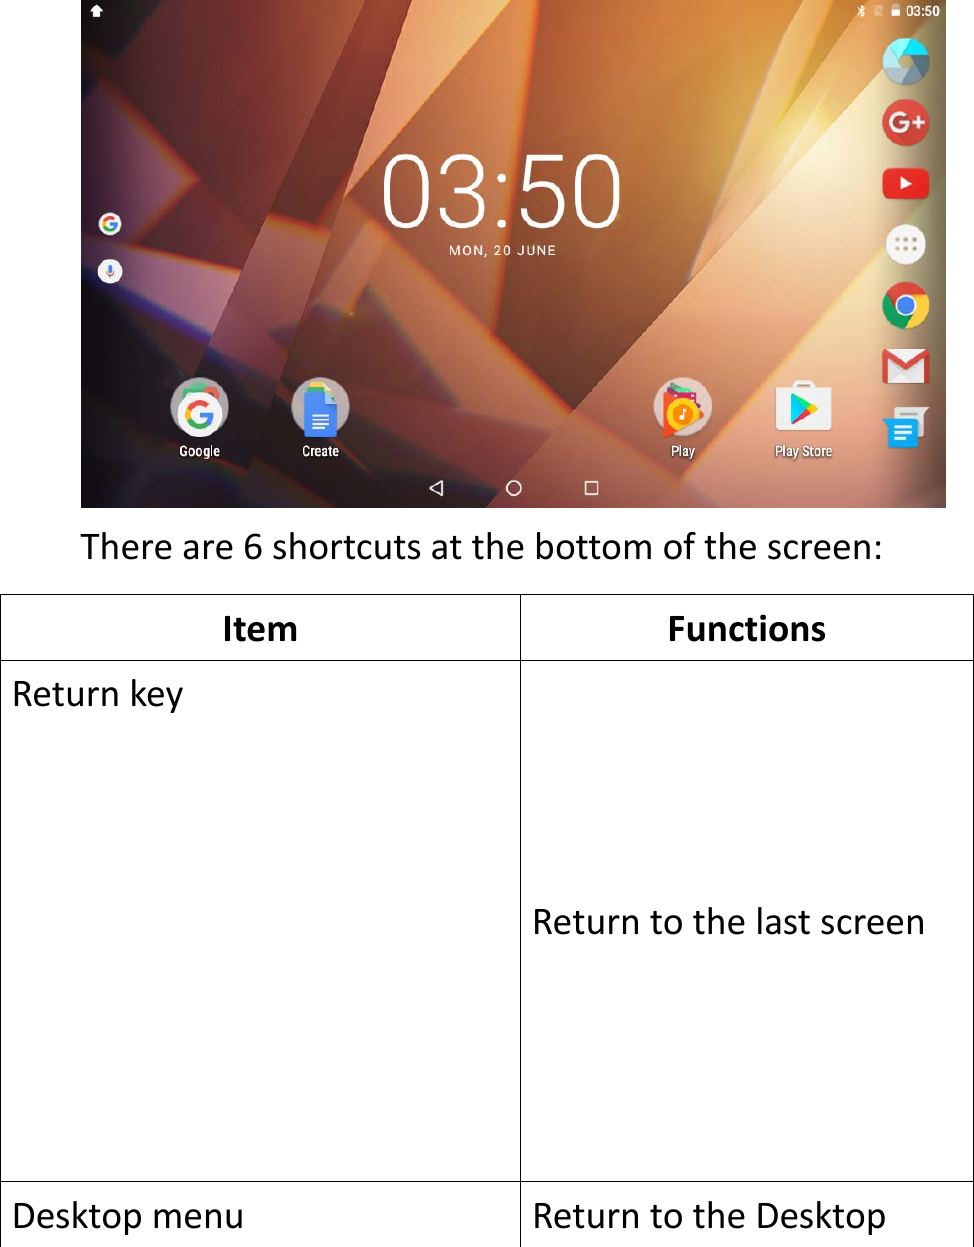         Thereare6shortcutsatthebottomofthescreen:ItemFunctionsReturnkeyReturntothelastscreenDesktopmenu ReturntotheDesktop